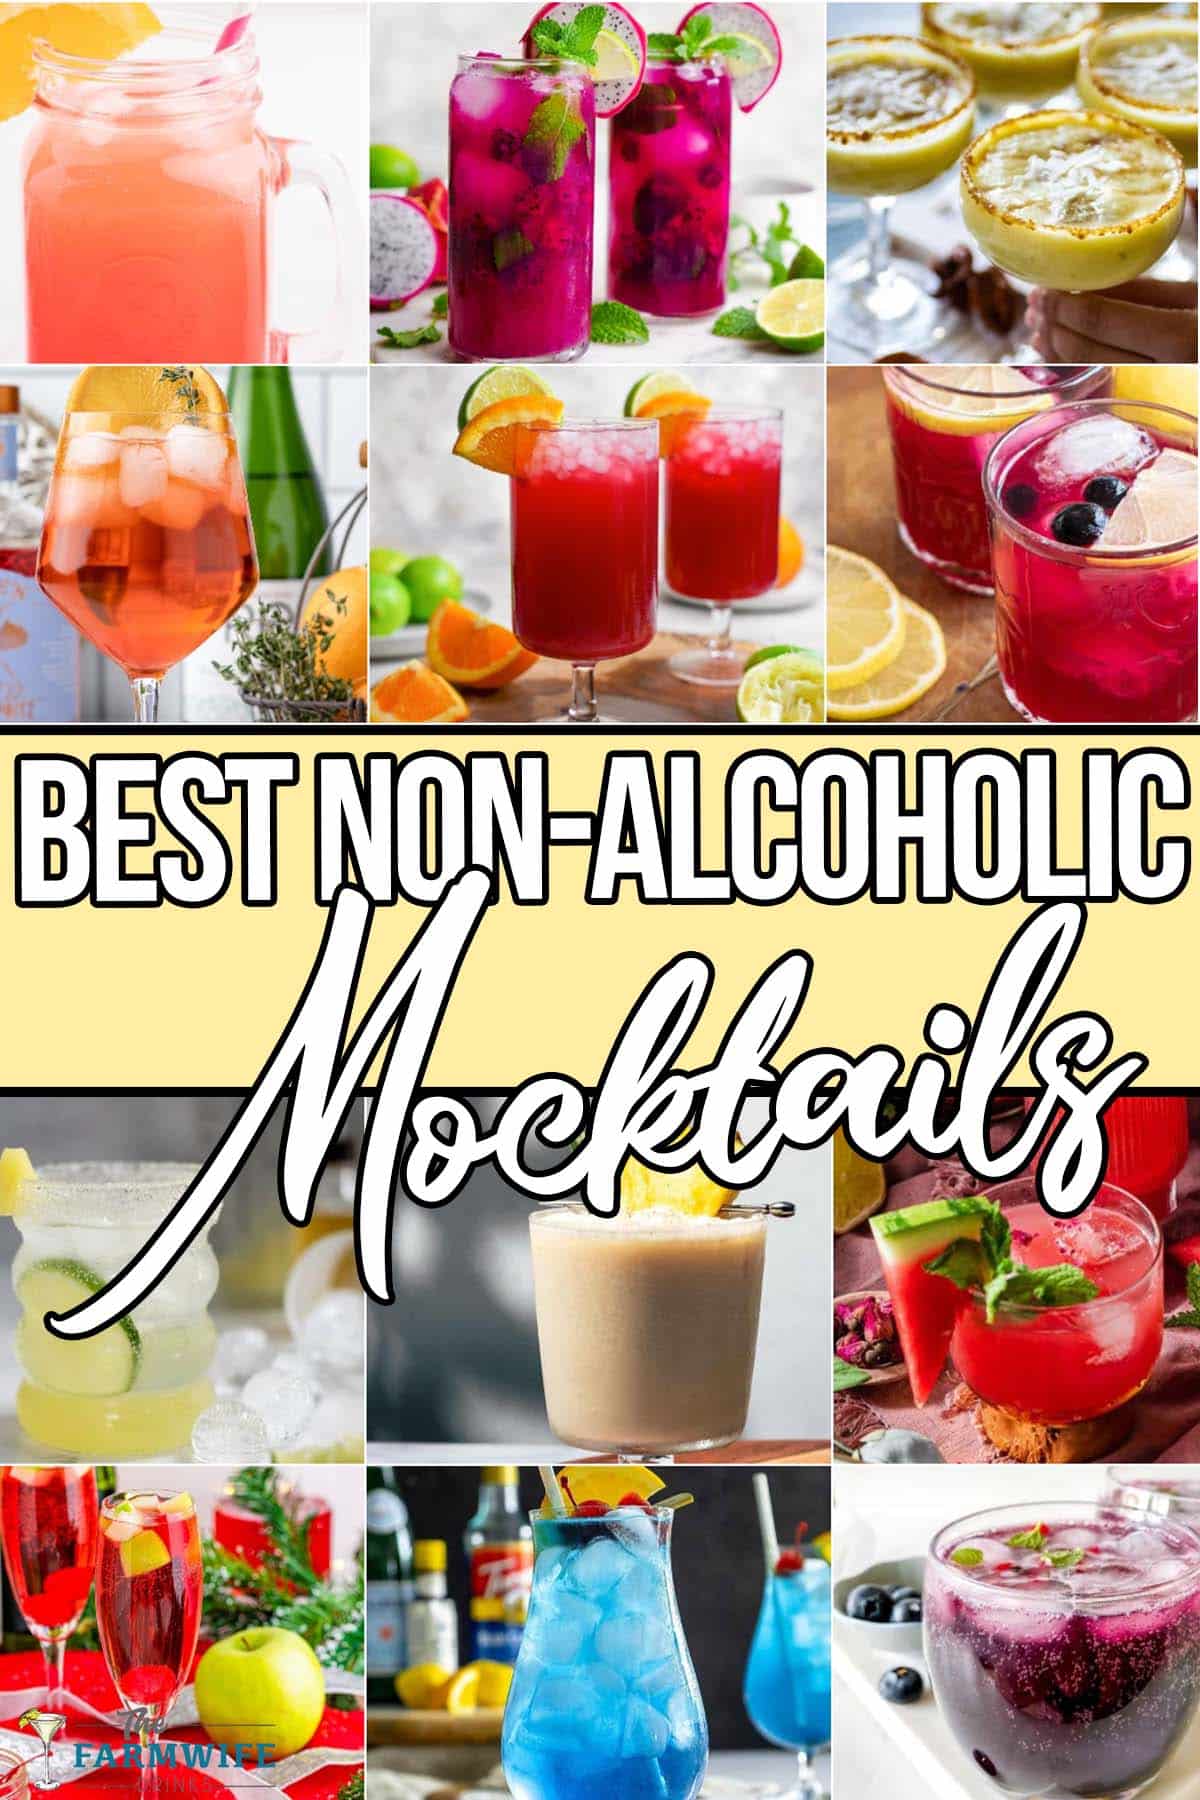 photo collage of easy mocktails with text which reads best non-alcoholic mocktails